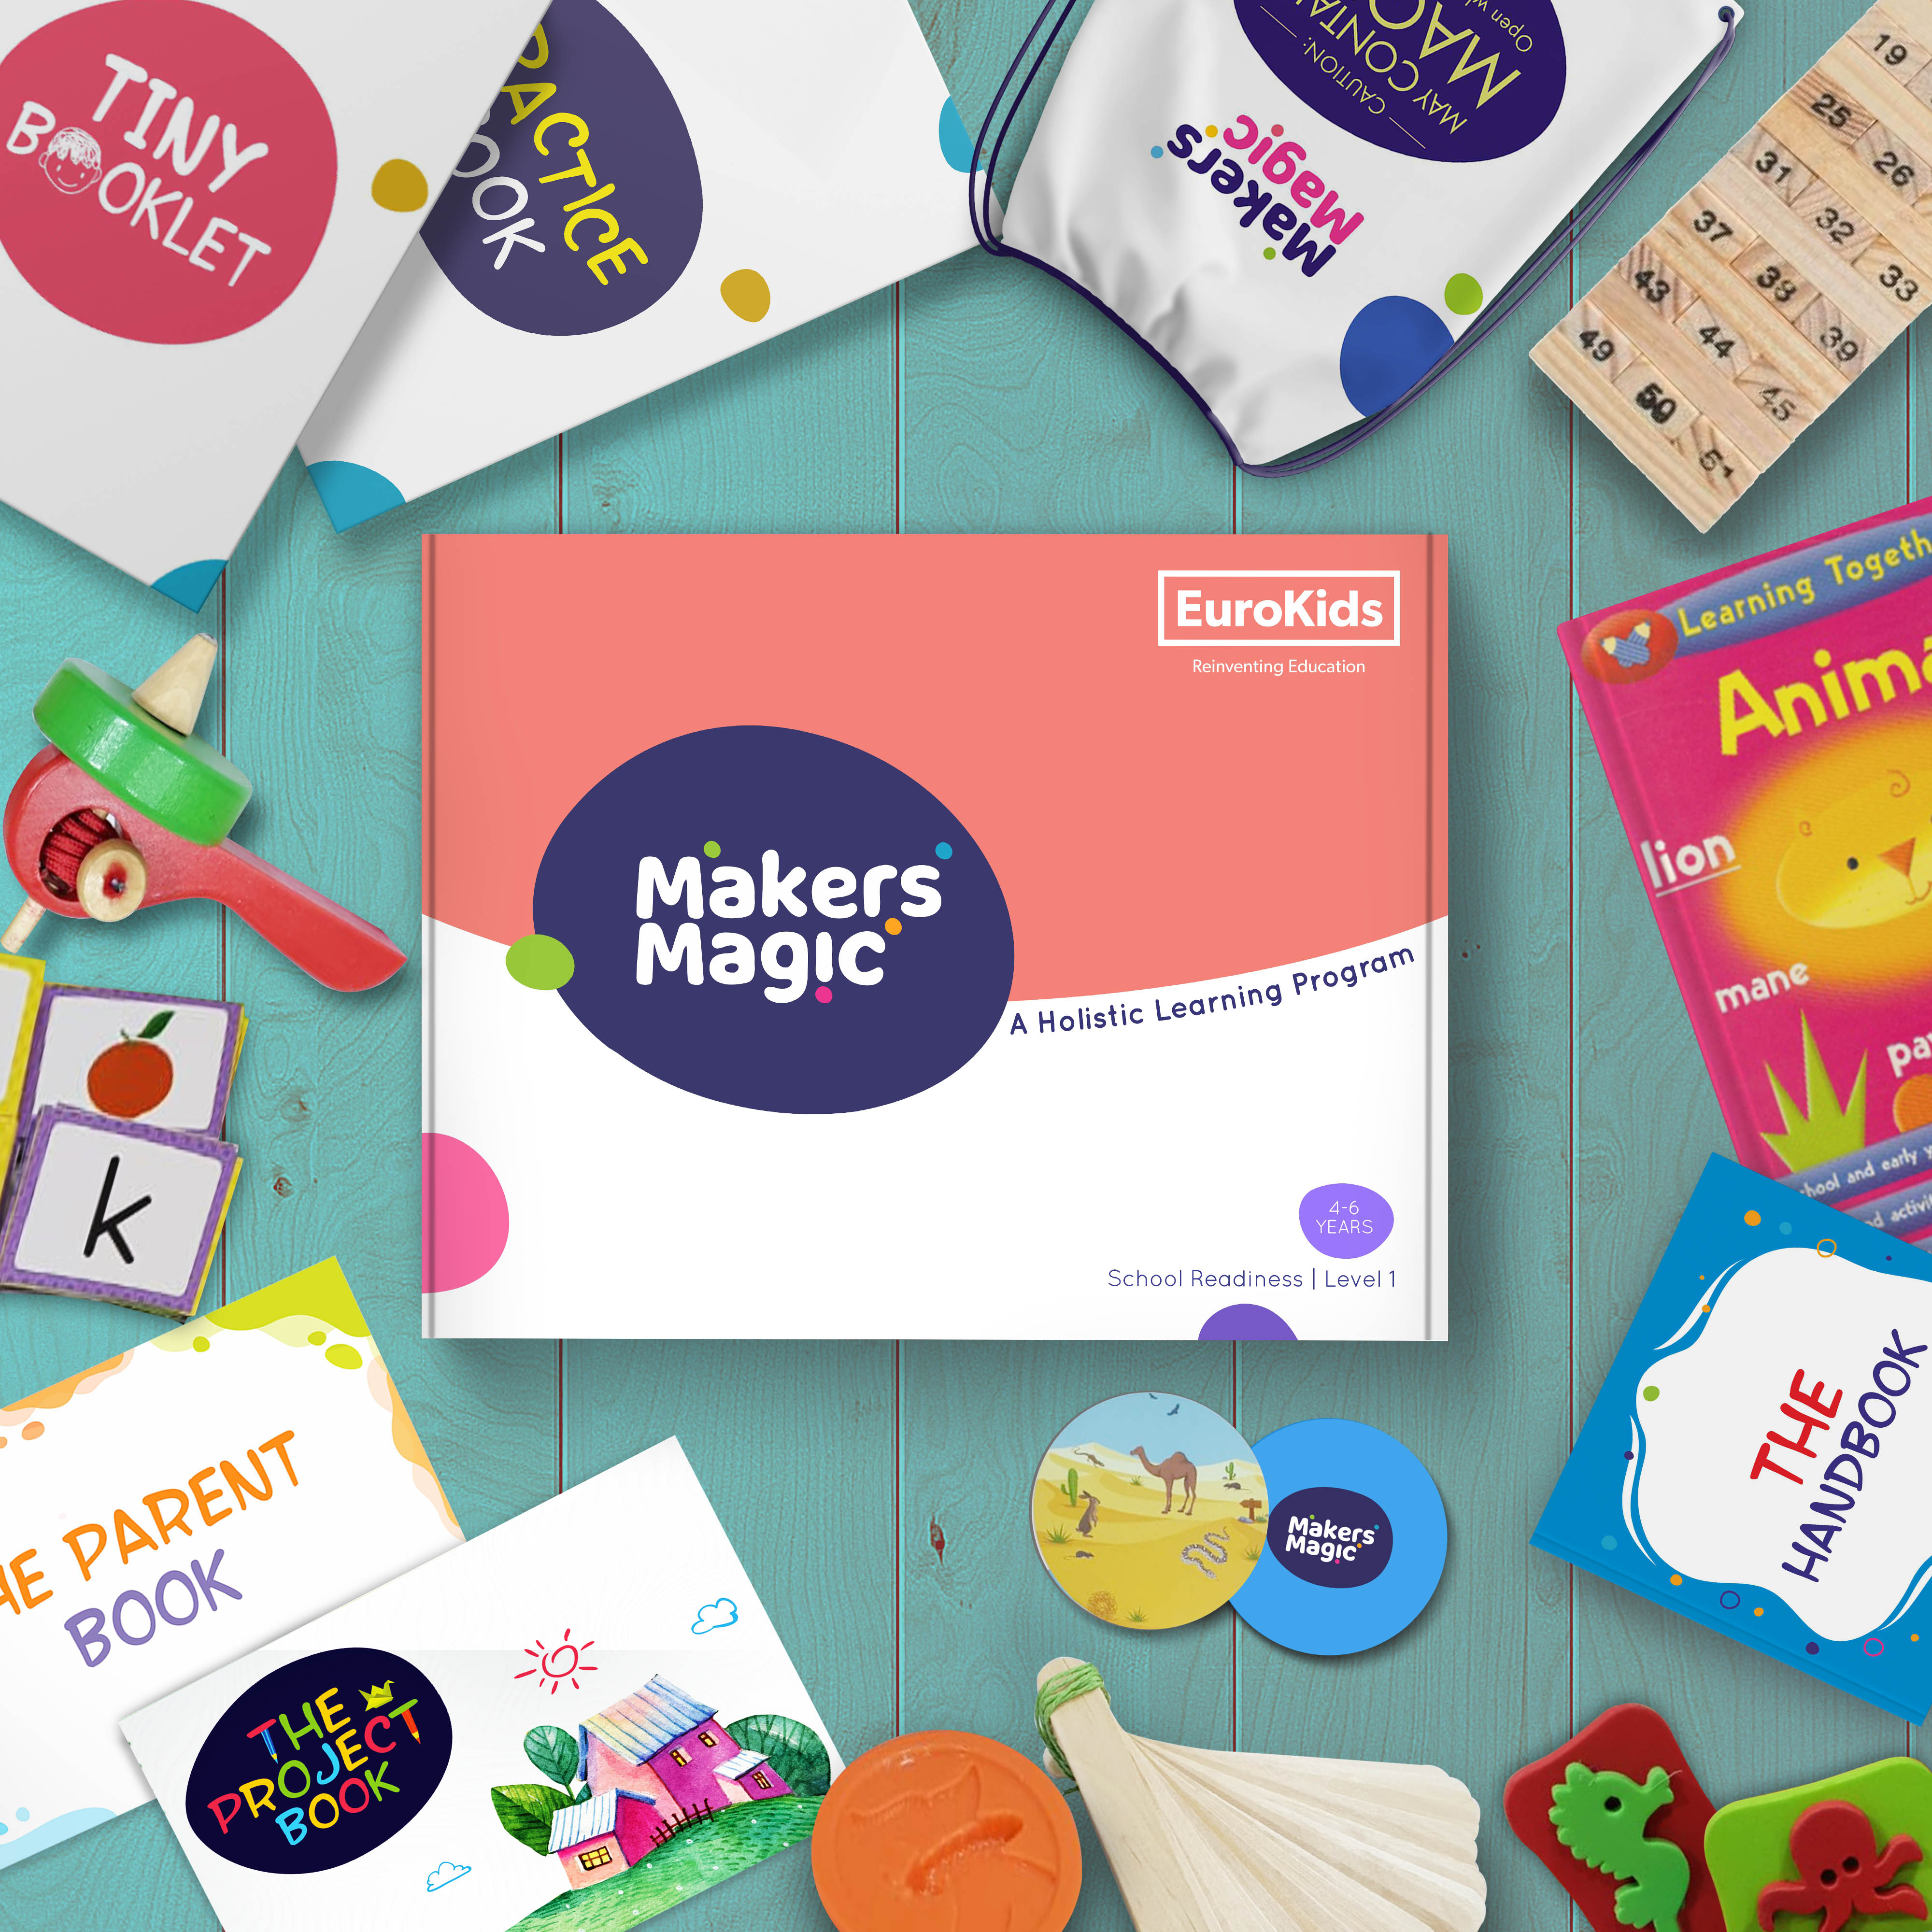 Makers Magic, the at-home Maker-Centered Learning Program, First time in  India by EuroKids - FM Live